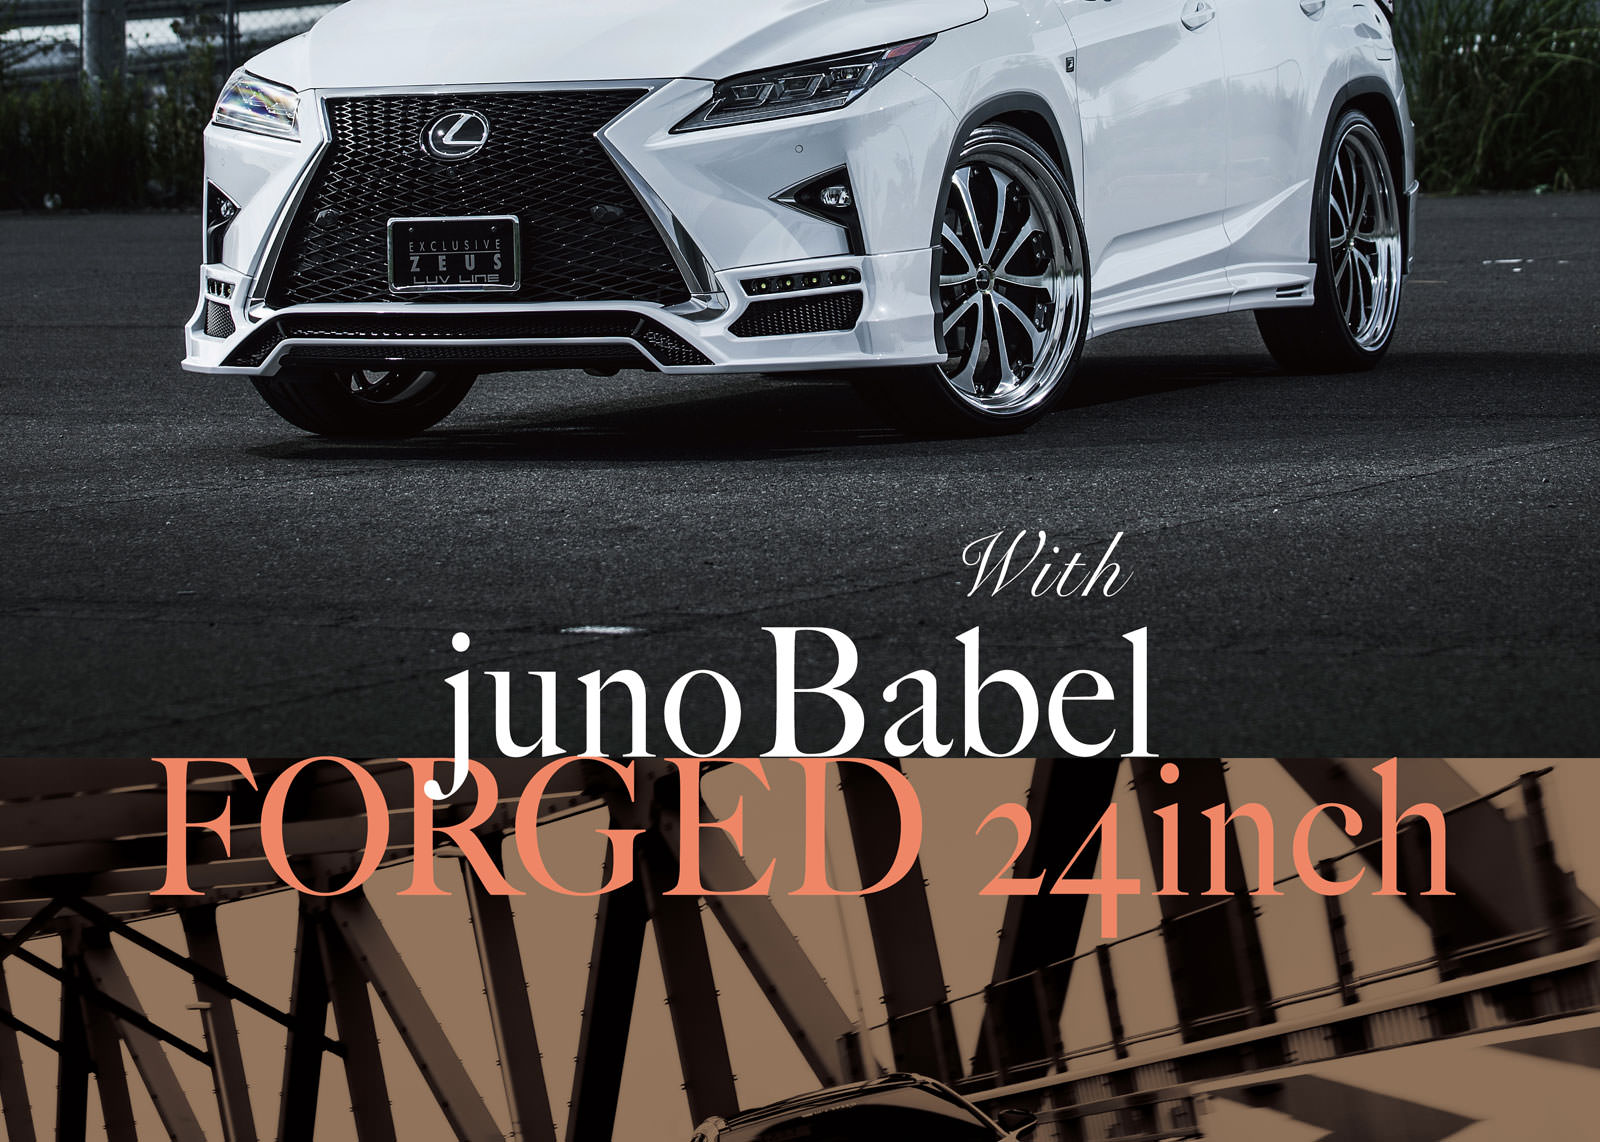 With juno Babel FORGED 24inch